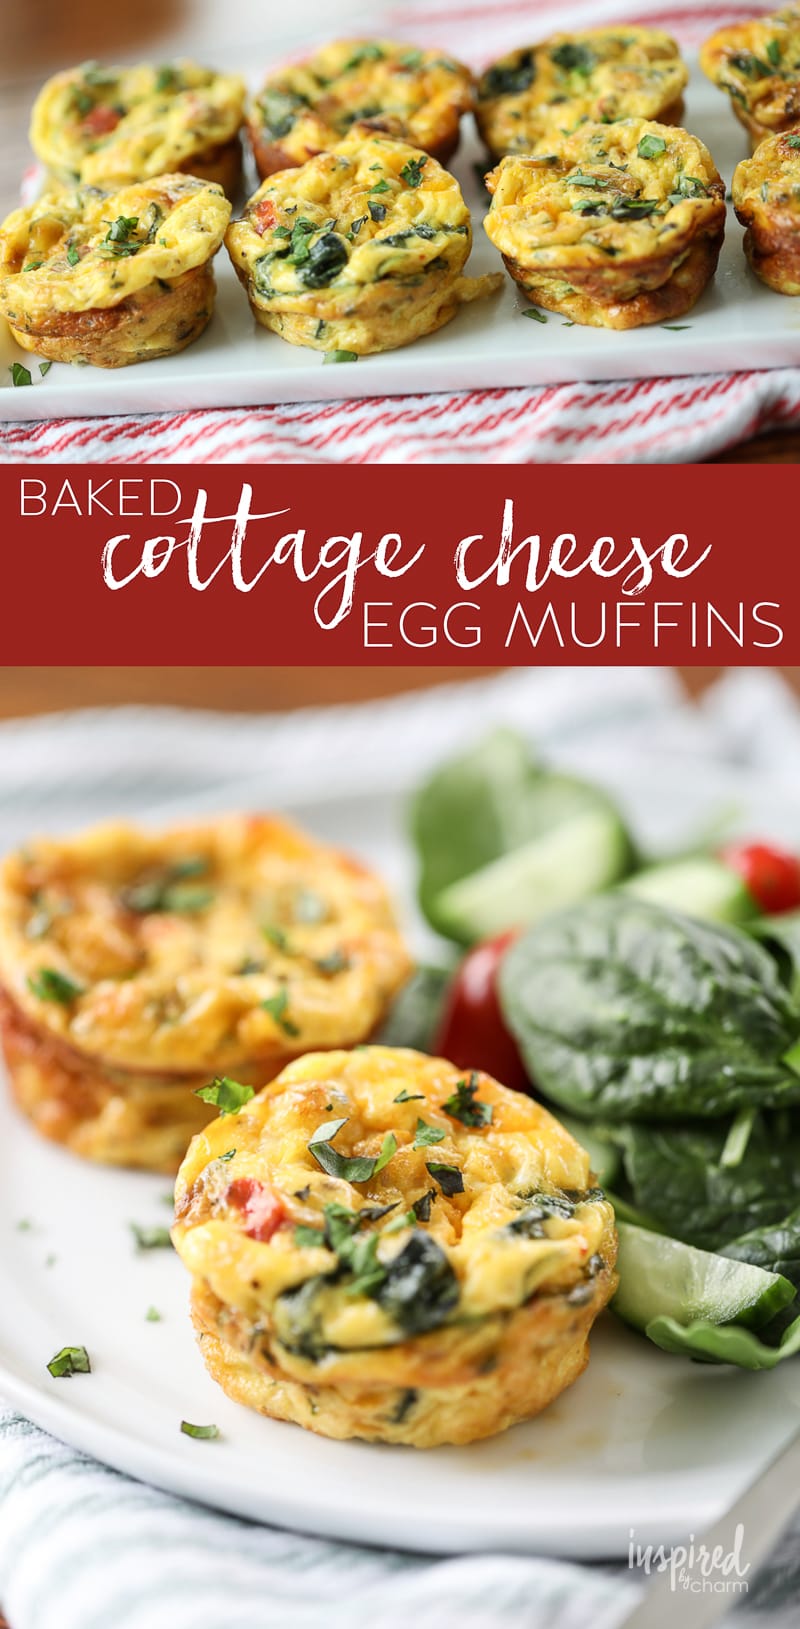 Baked Cottage Cheese Egg Muffins (Easy, Healthy, On-the-Go Breakfast!)